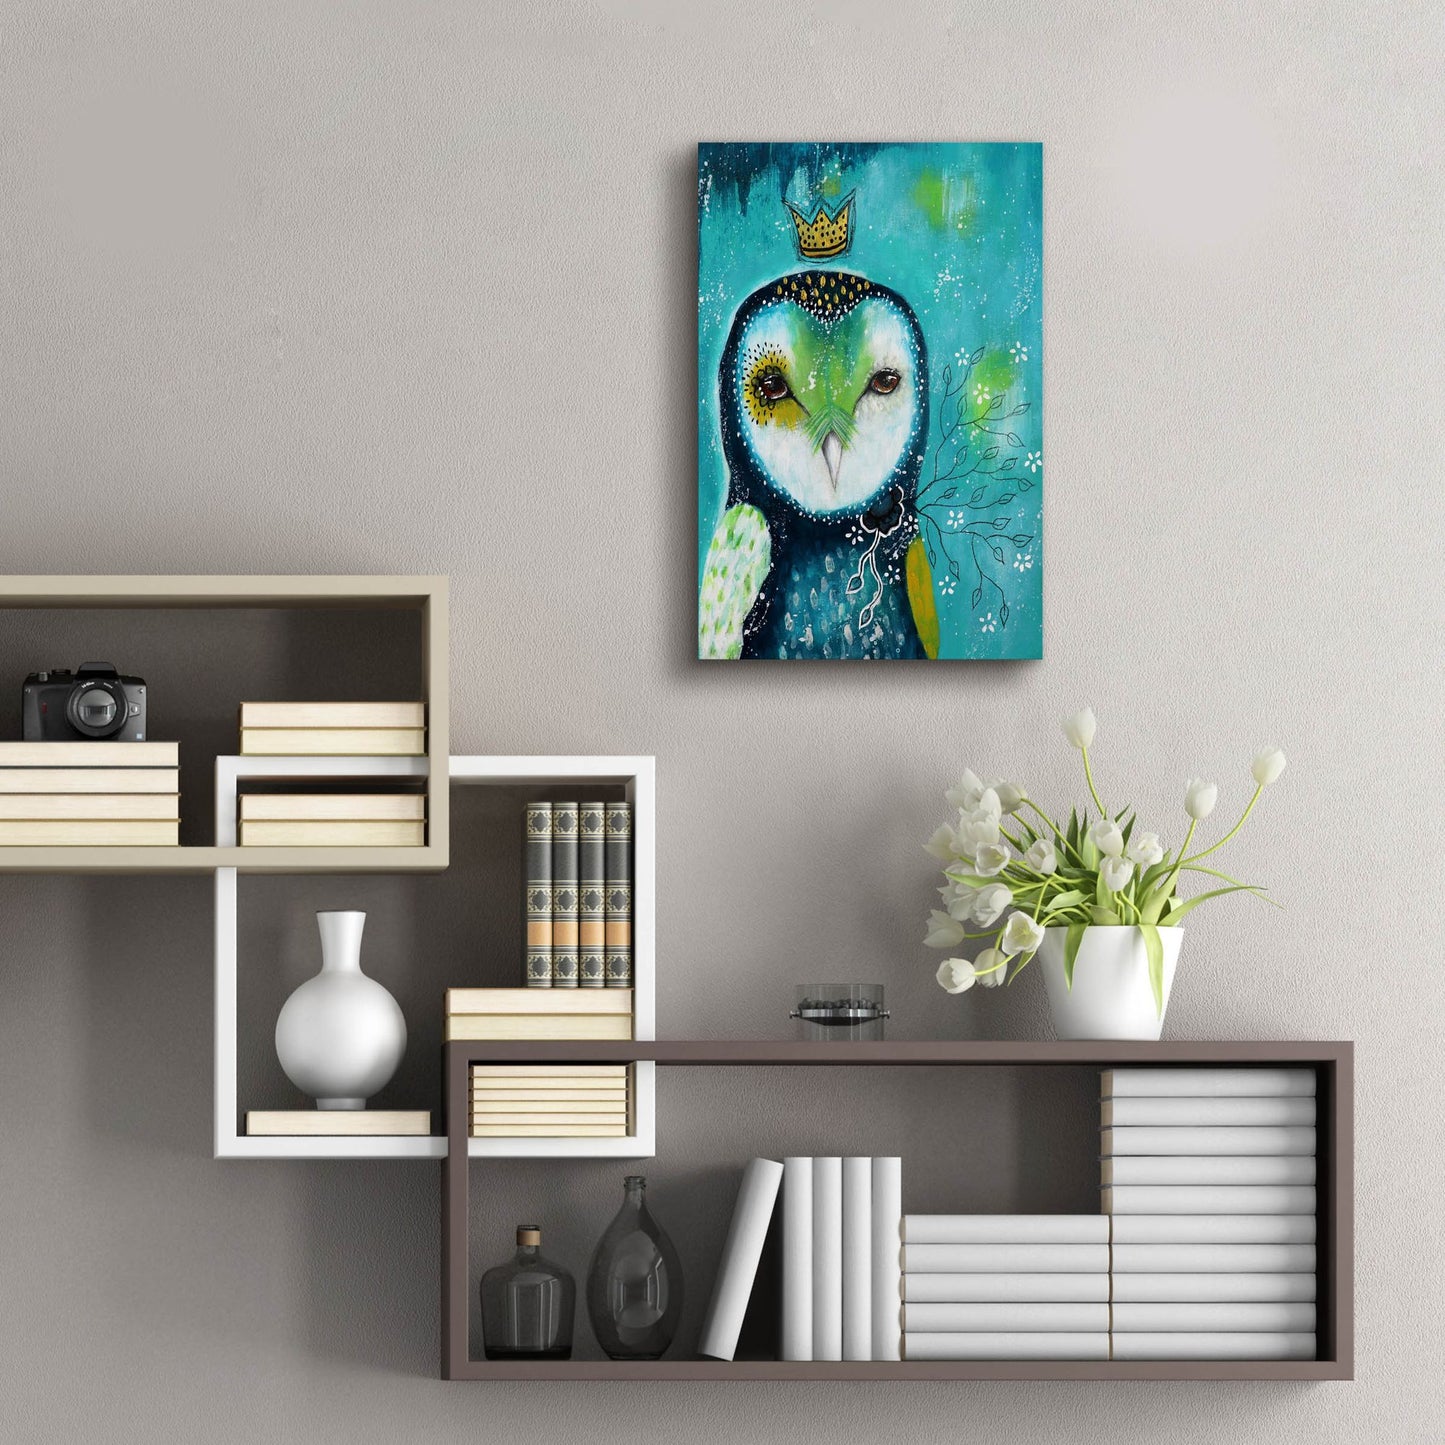 Epic Art 'I Offer You Love' by The Secret Hermit, Acrylic Glass Wall Art,16x24